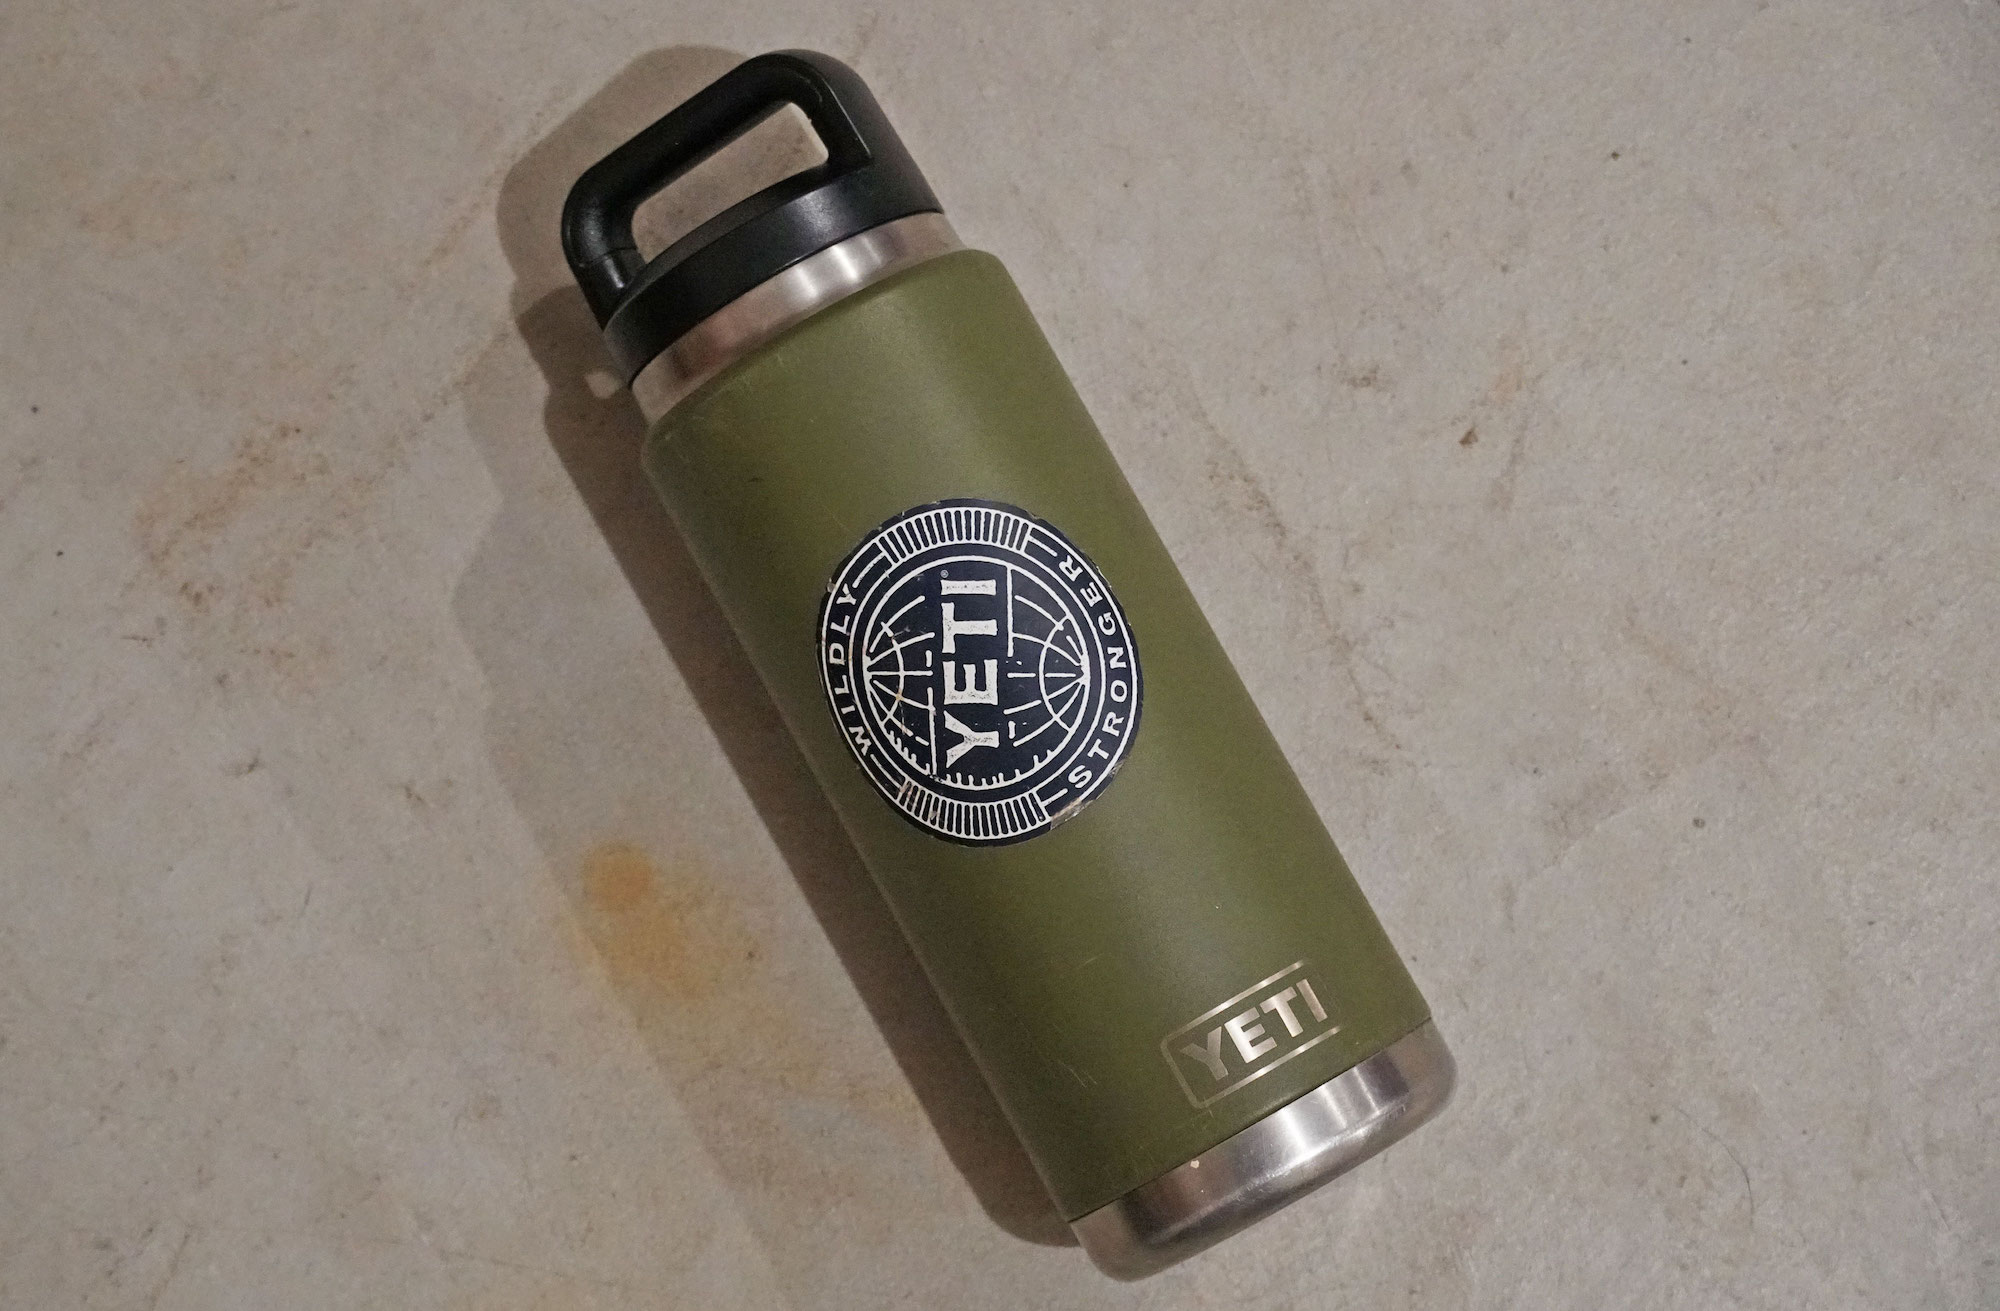 A green YETI Rambler thermos with a black cap